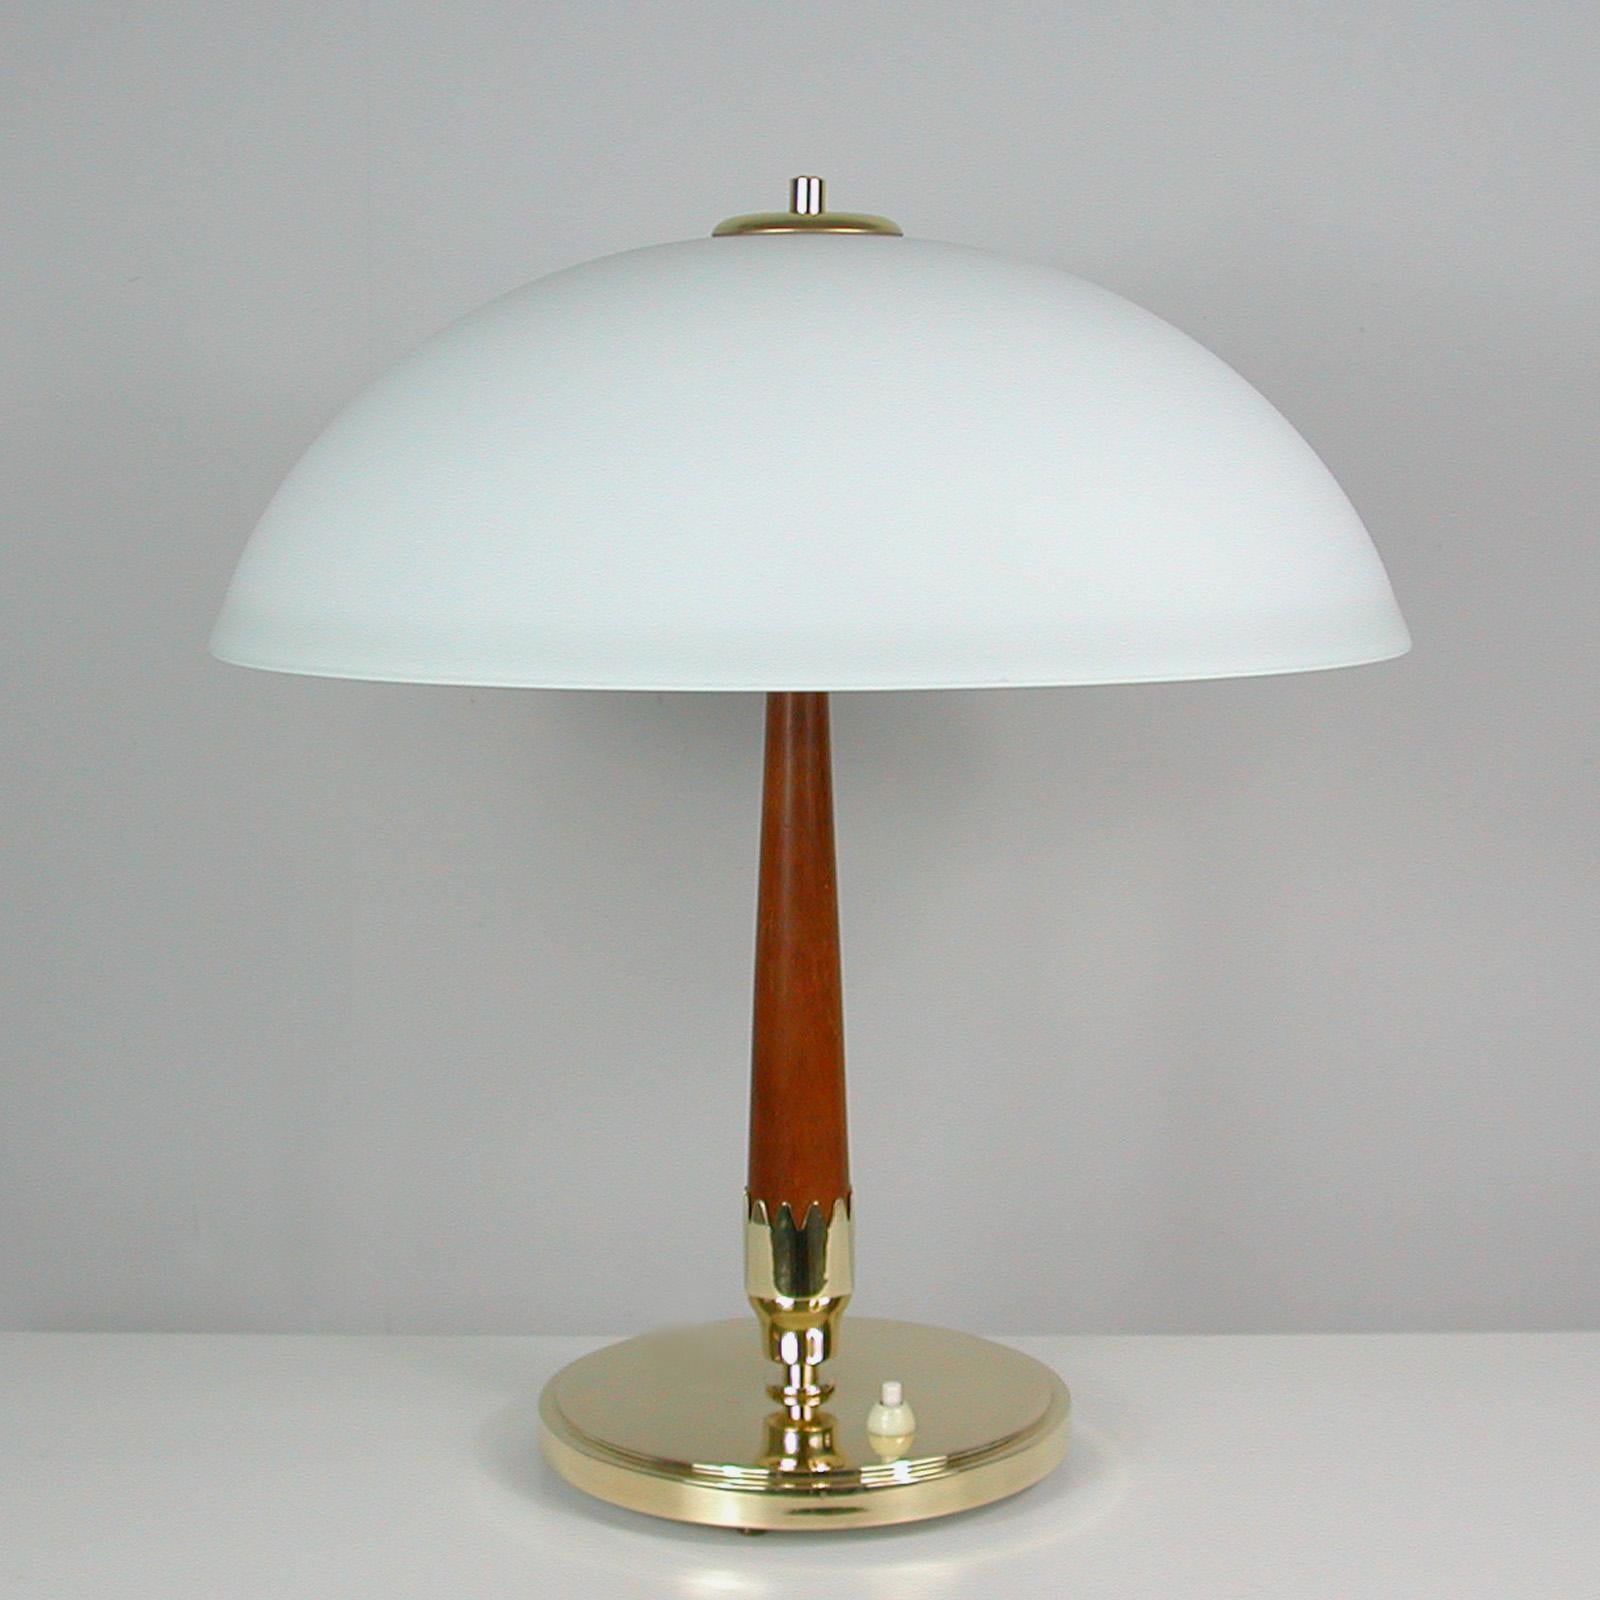 This large and elegant Scandinavian modernist table lamp was designed and manufactured in Sweden in the 1950s by Bohlmarks (model no. 15520). It features a brass base, teak lamp stem and a dome shaped frosted opaline lampshade and requires two E27